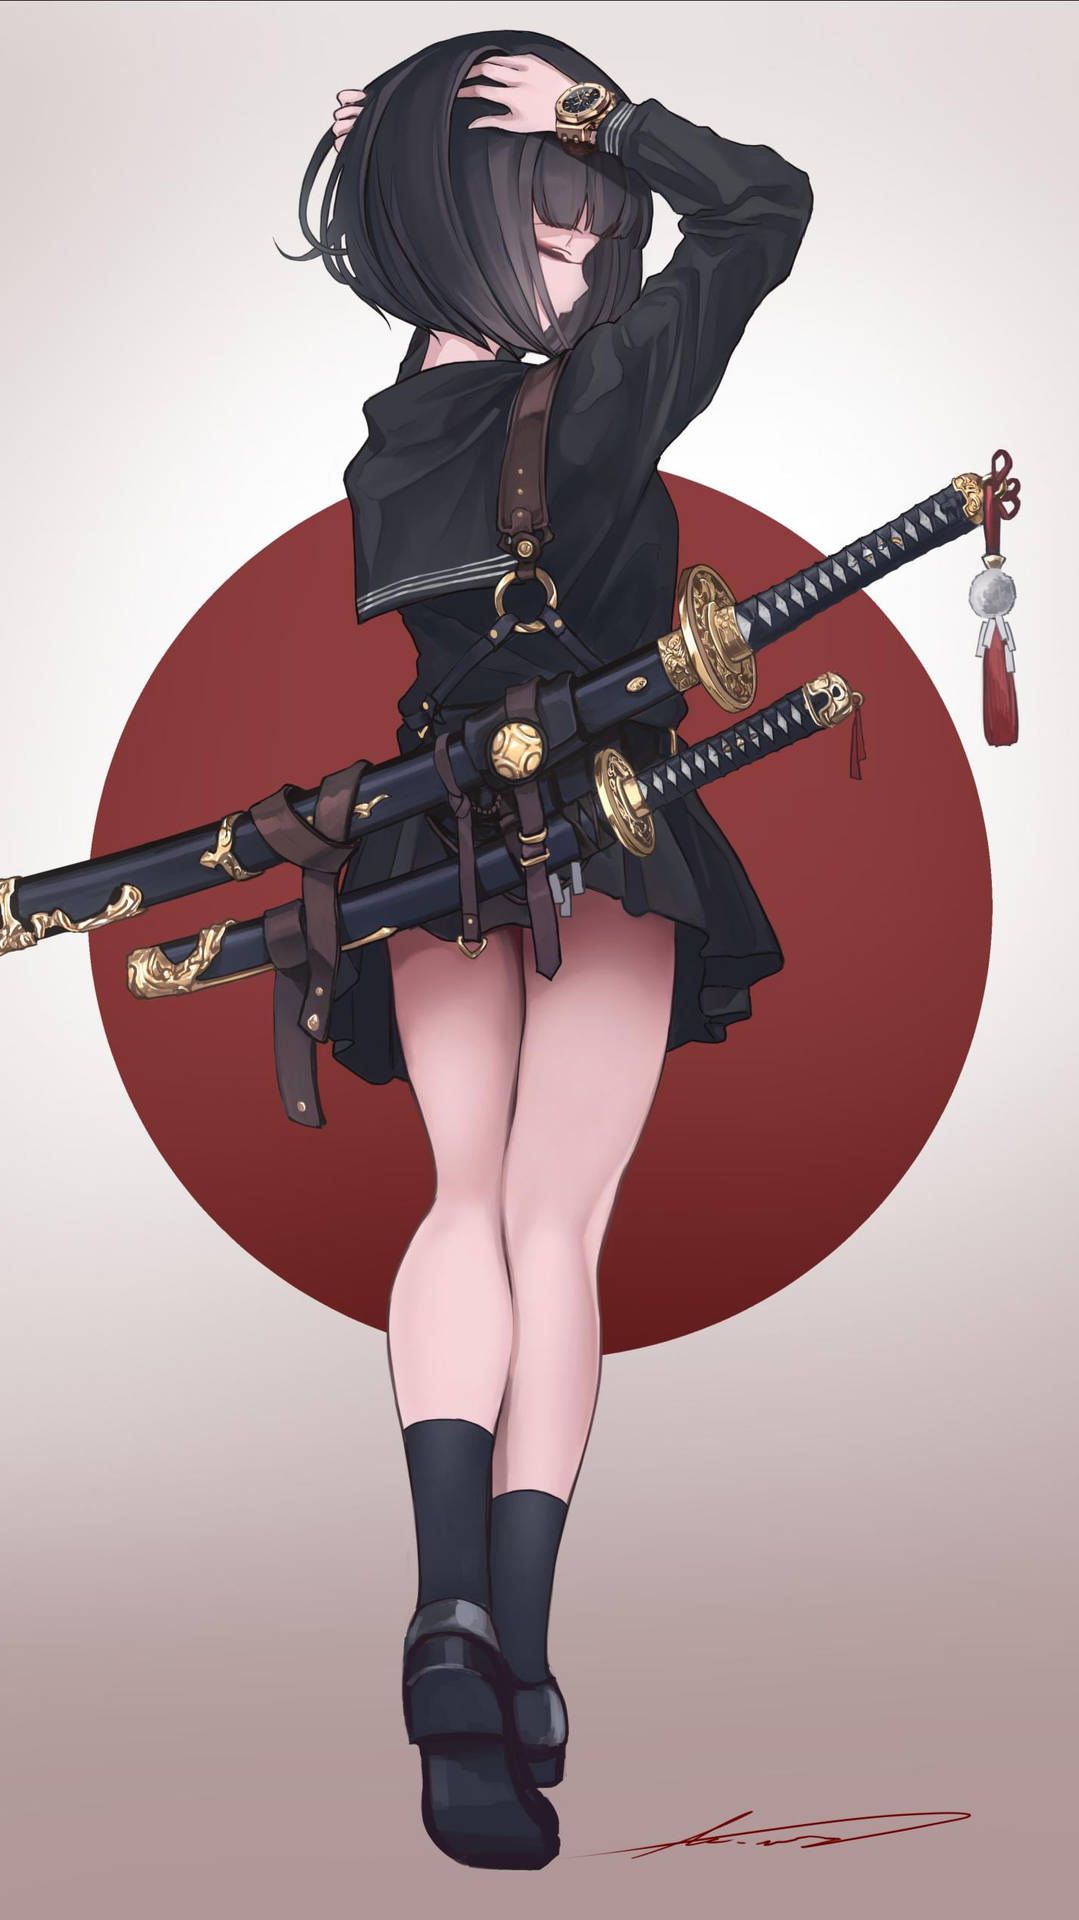 IPhone wallpaper anime girl with a sword in her hands - Samurai